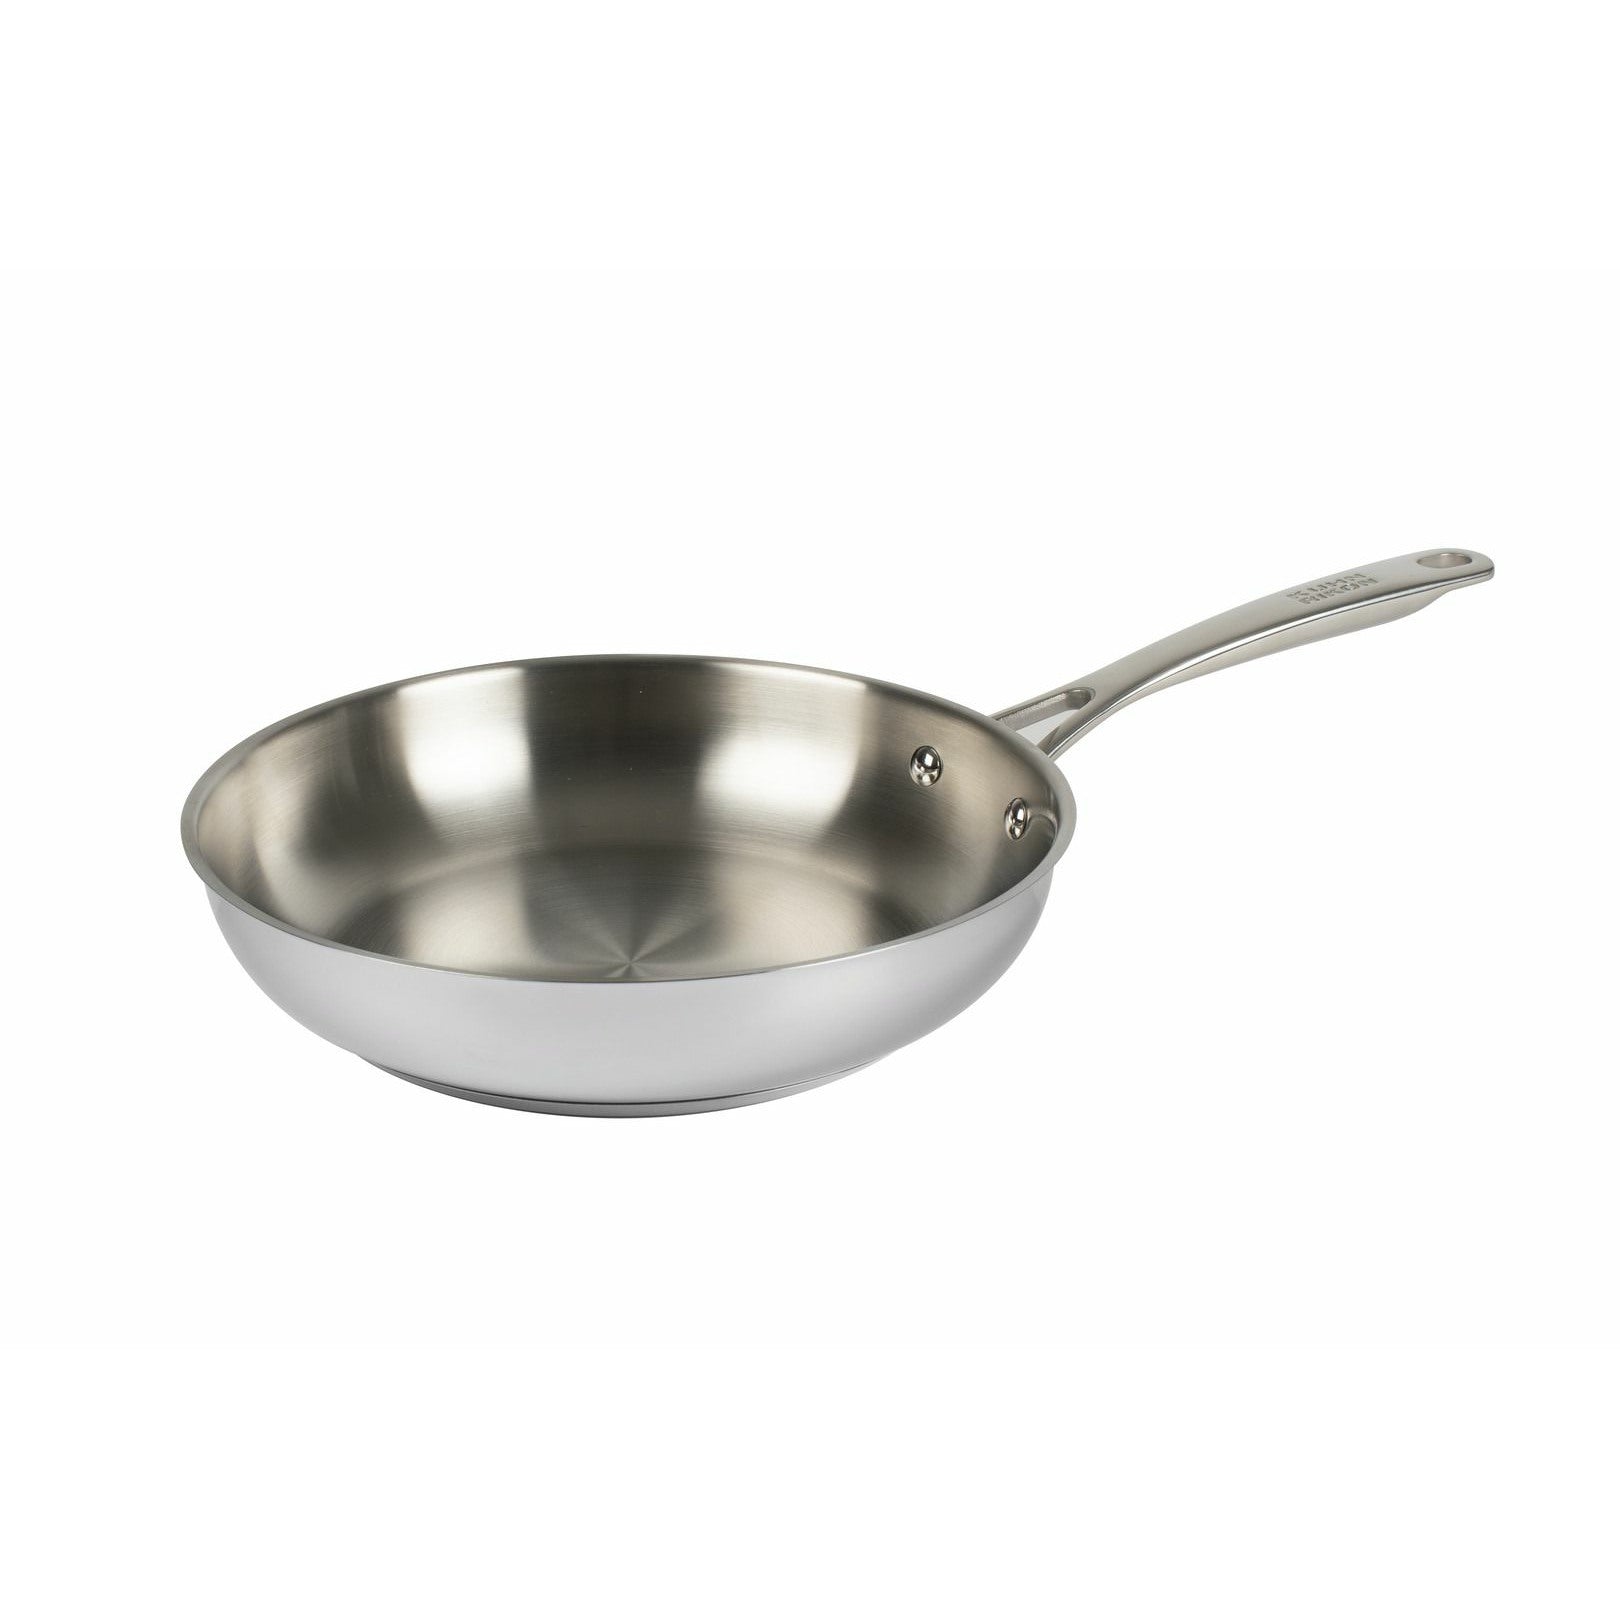 Kuhn Rikon AllRound Frying Pan uncoated 20cm 31384